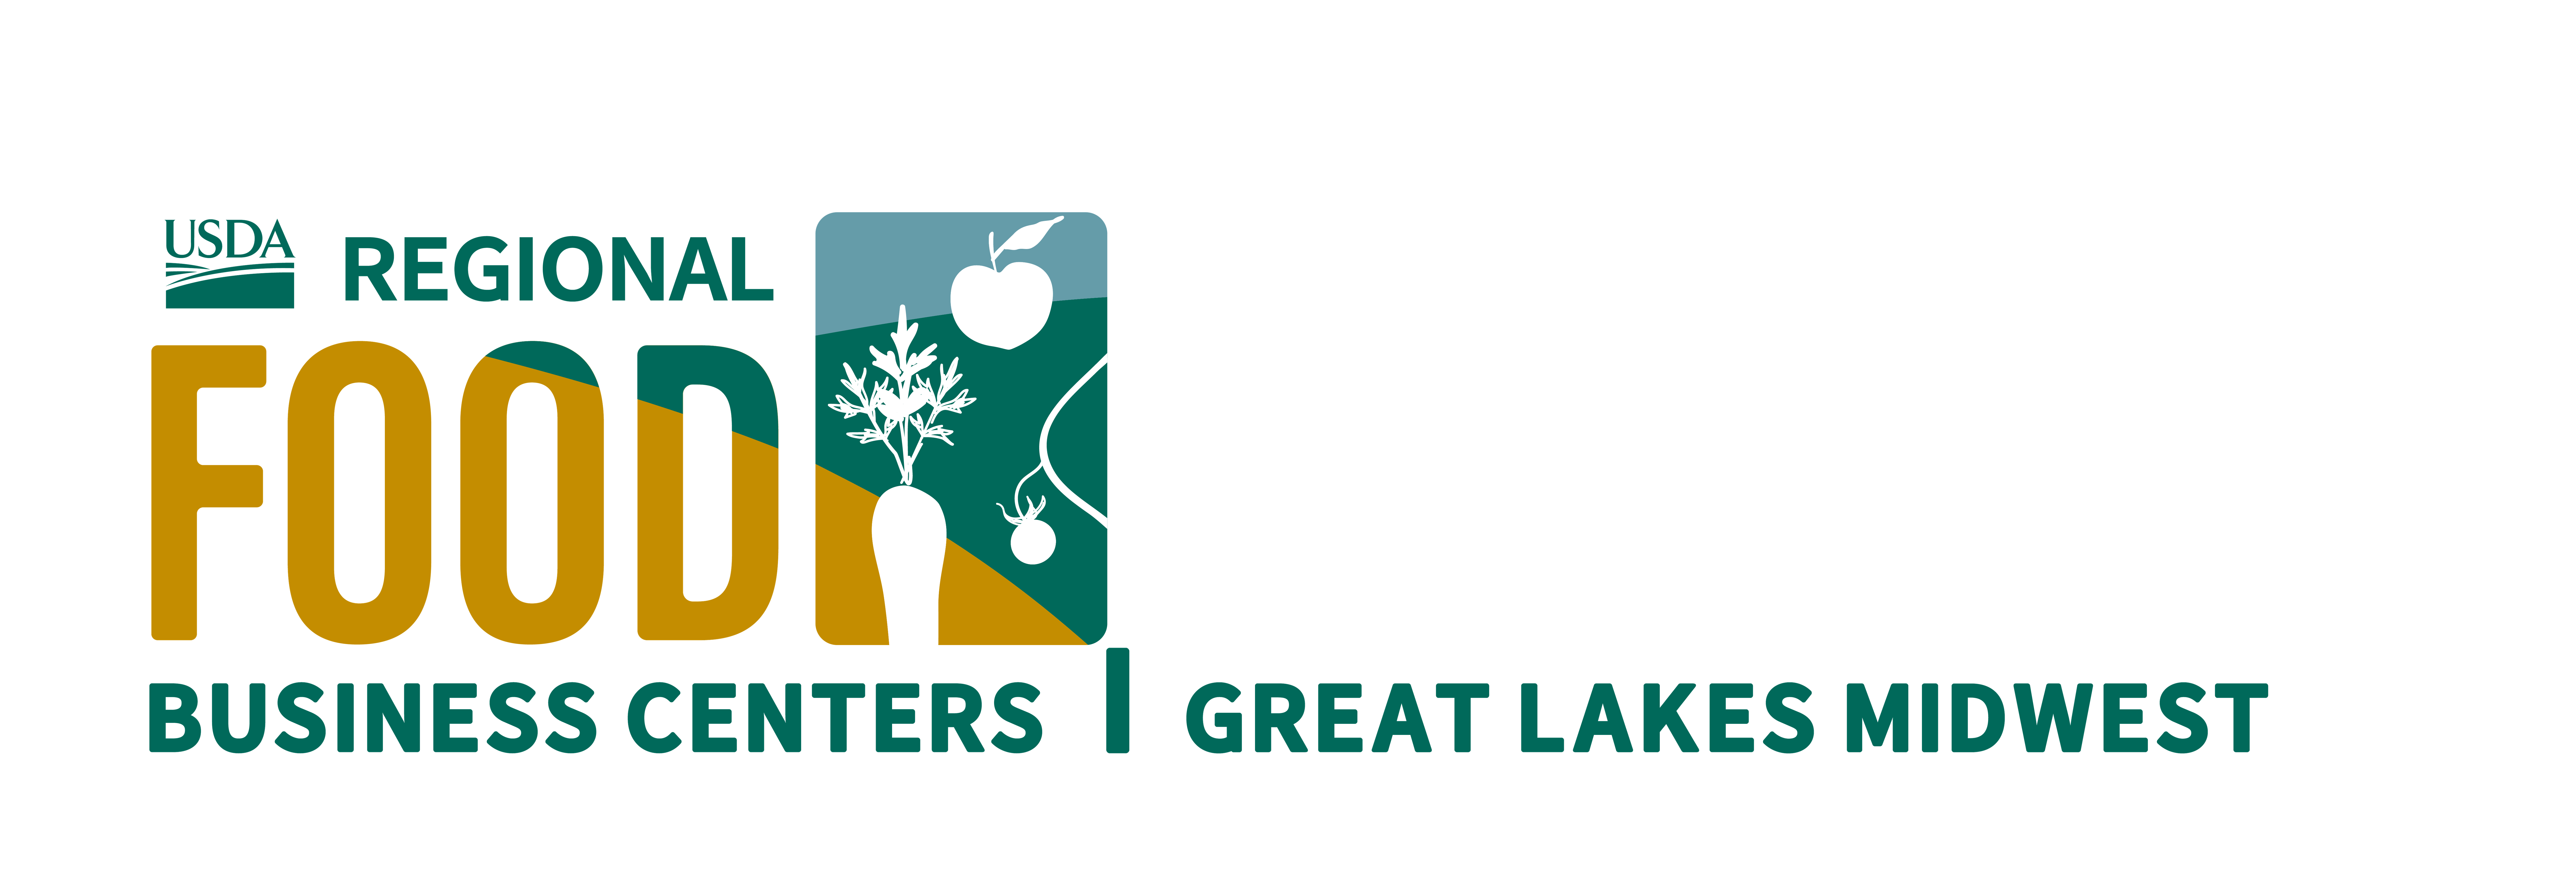 Great Lakes Midwest Regional Food Business Center